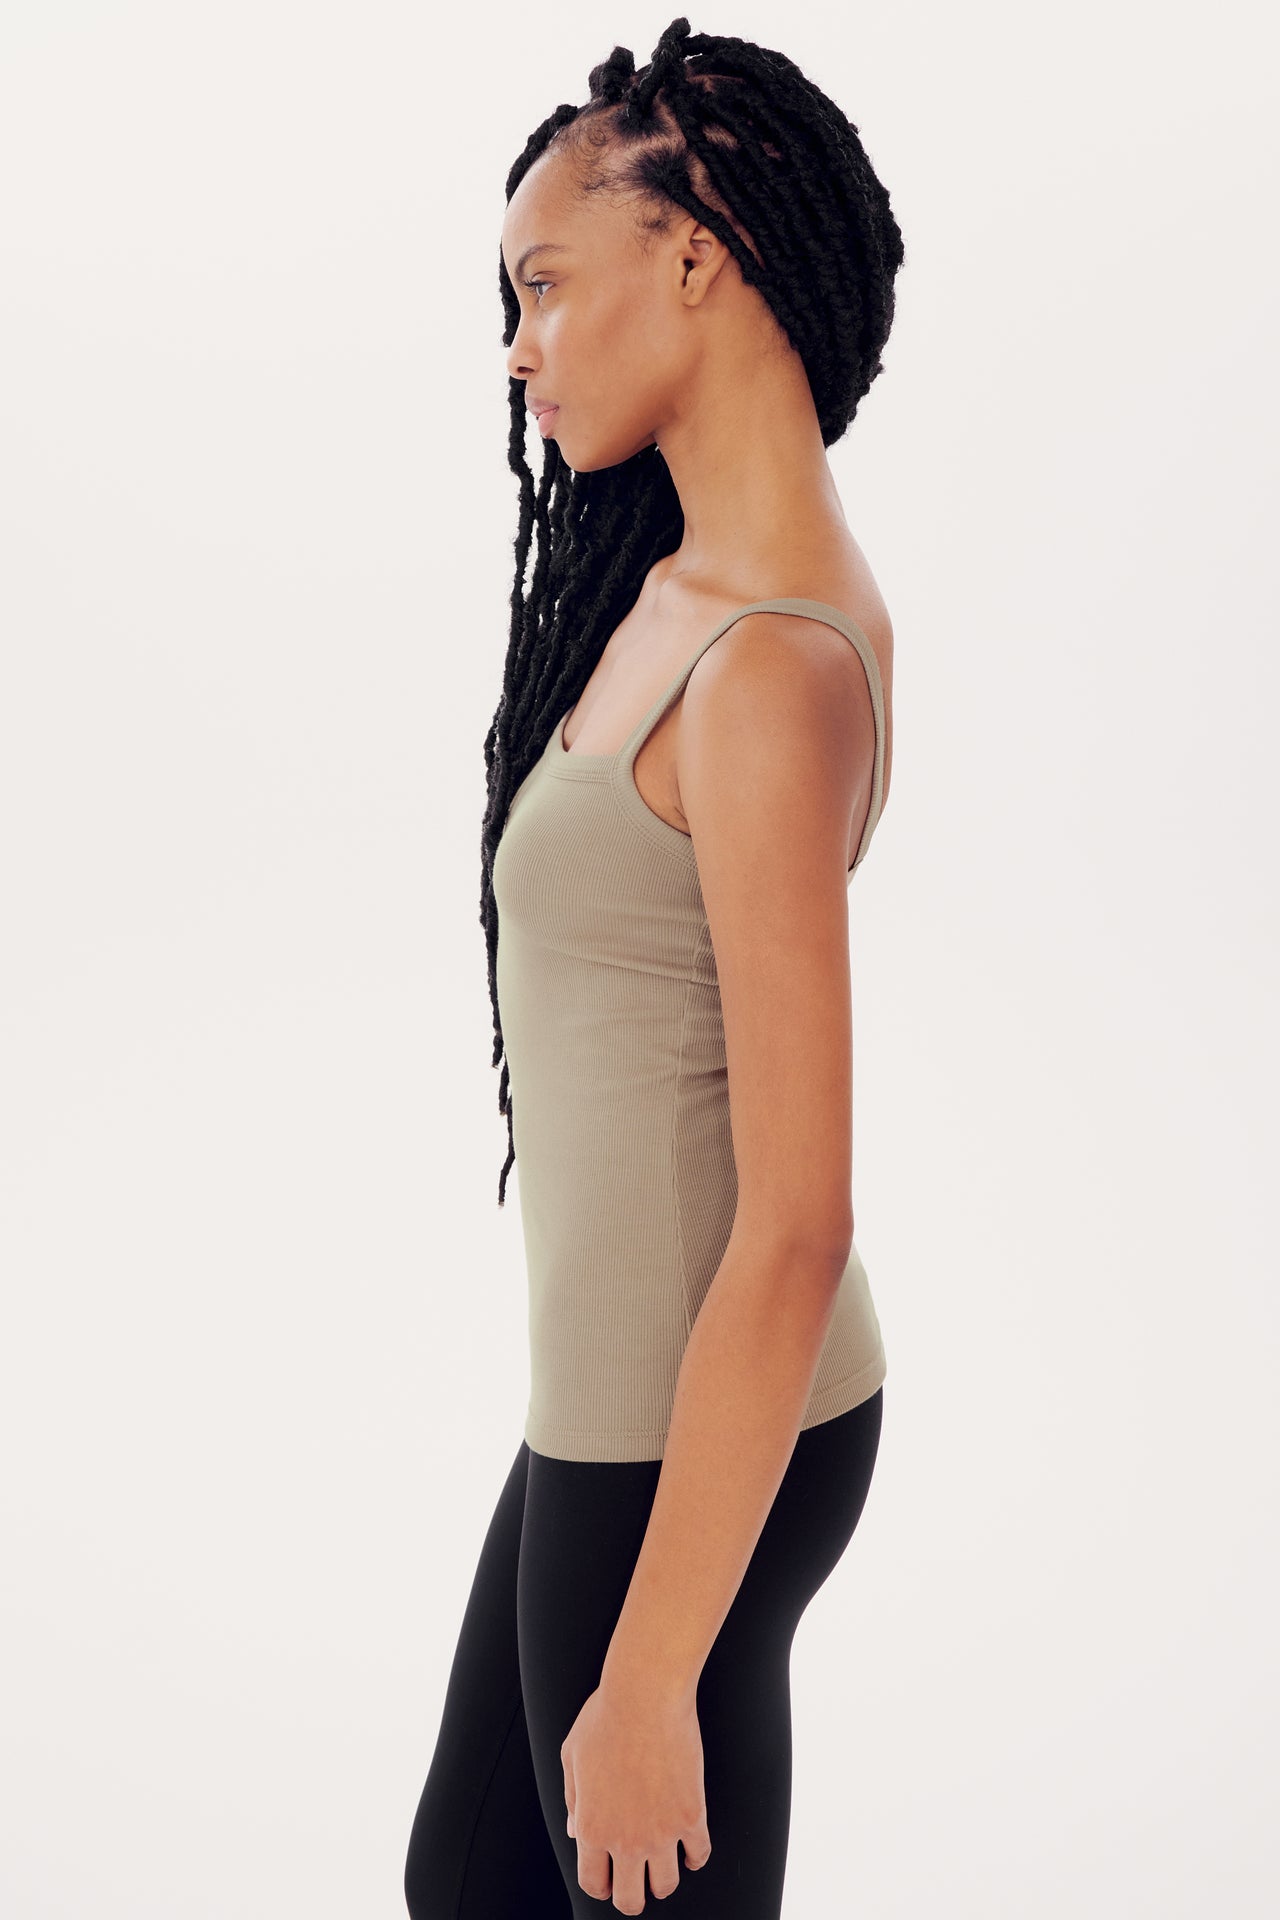 Side profile of a young woman with long braids wearing a Romy Rib Tank in Latte by SPLITS59 with a square neckline and leggings, standing against a white background.